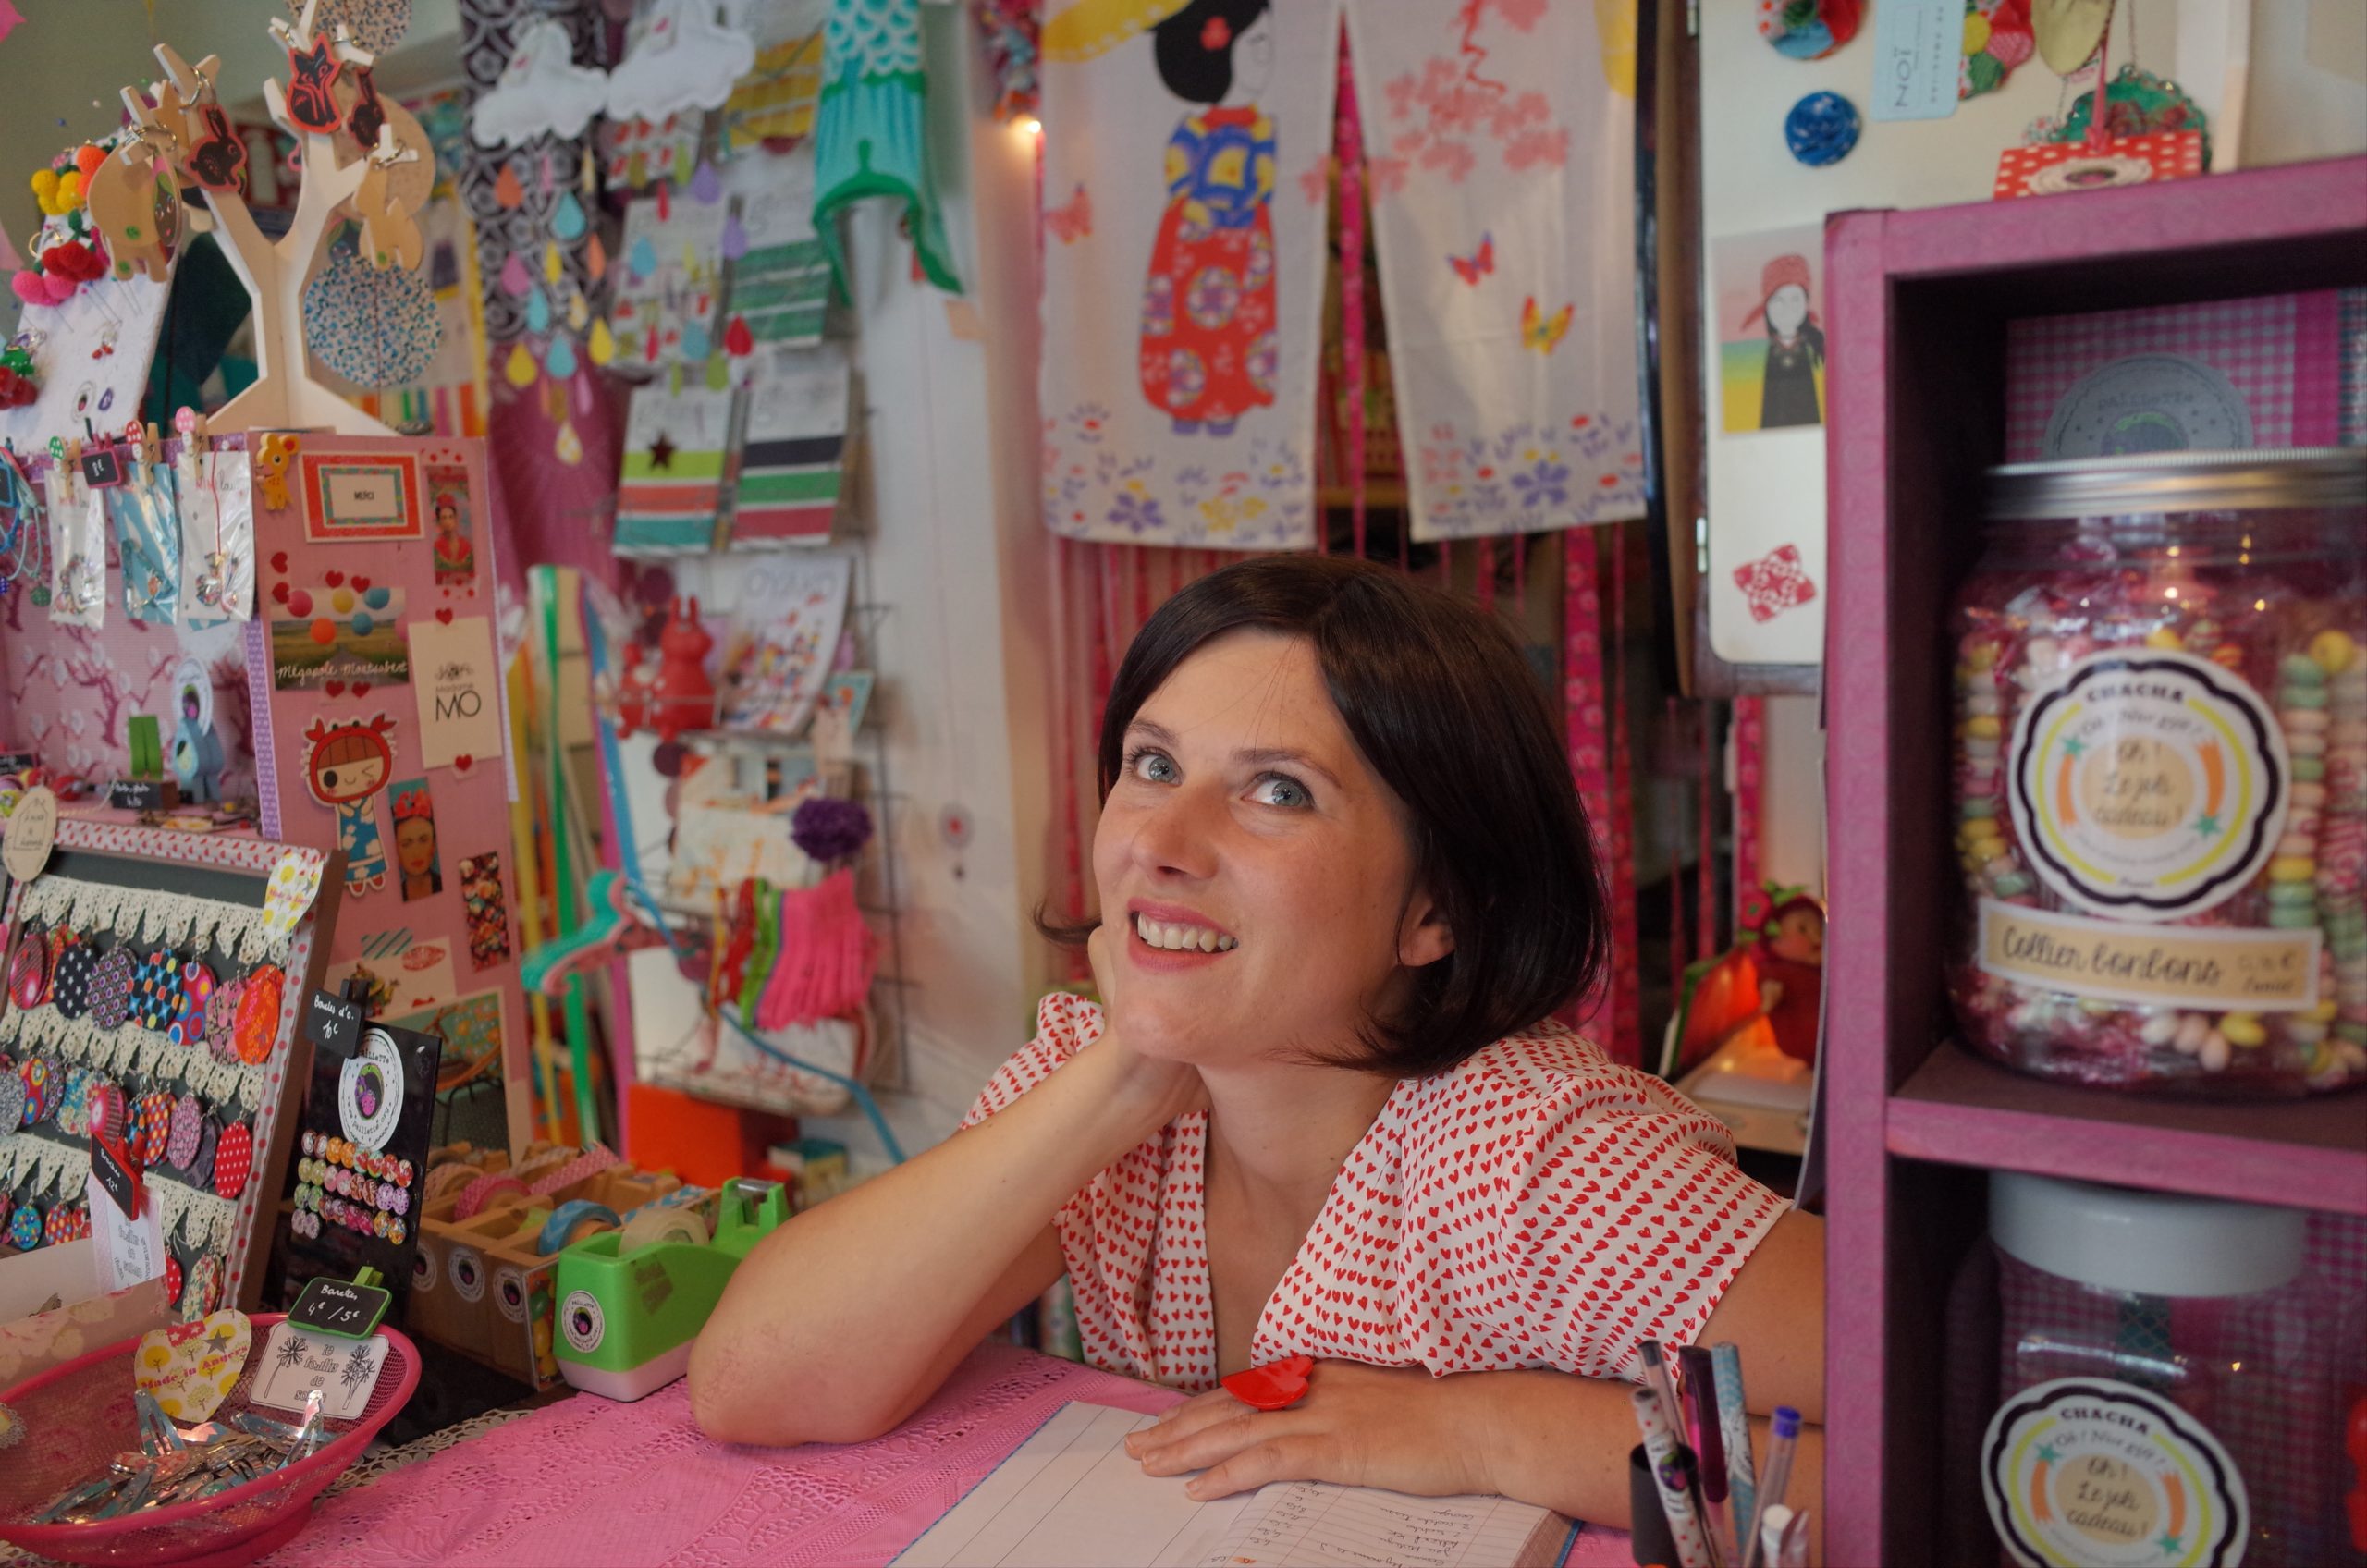 An amazon storefronts business owner posing inside her shop full of displayed knick knack merchandise